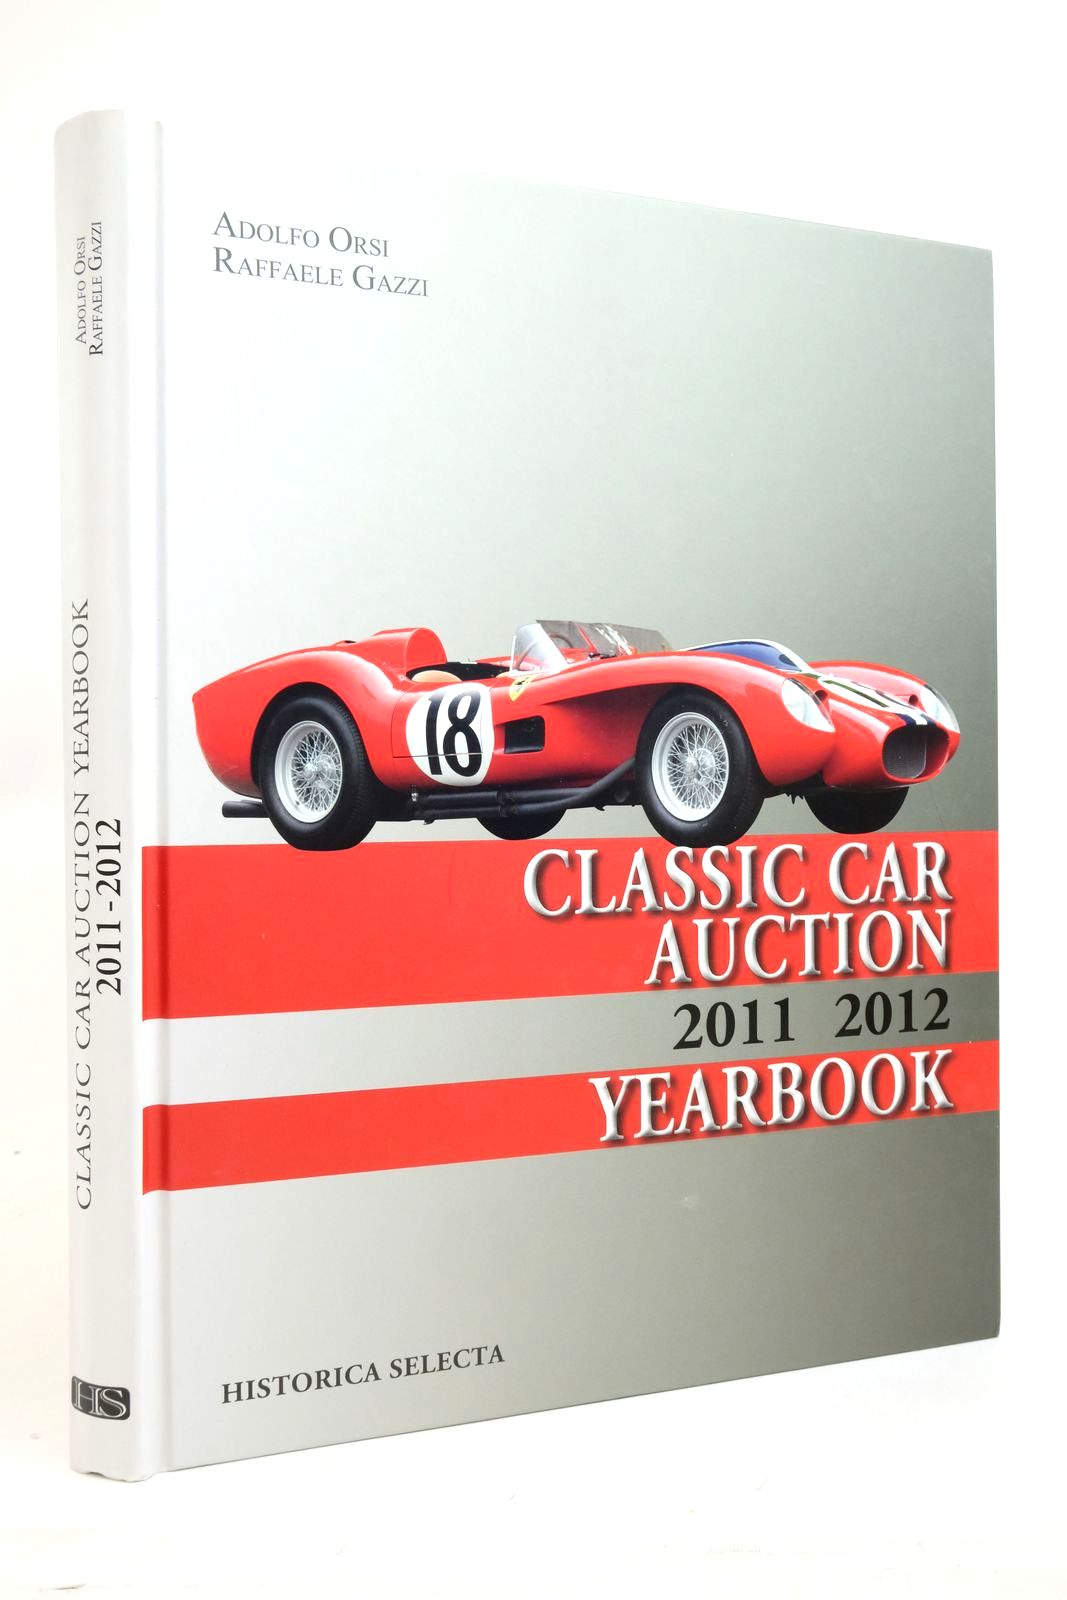 Photo of CLASSIC CAR AUCTION YEARBOOK 2011-2012 written by Orsi, Adolfo Gazzi, Raffaele published by Historica Selecta (STOCK CODE: 2136569)  for sale by Stella & Rose's Books